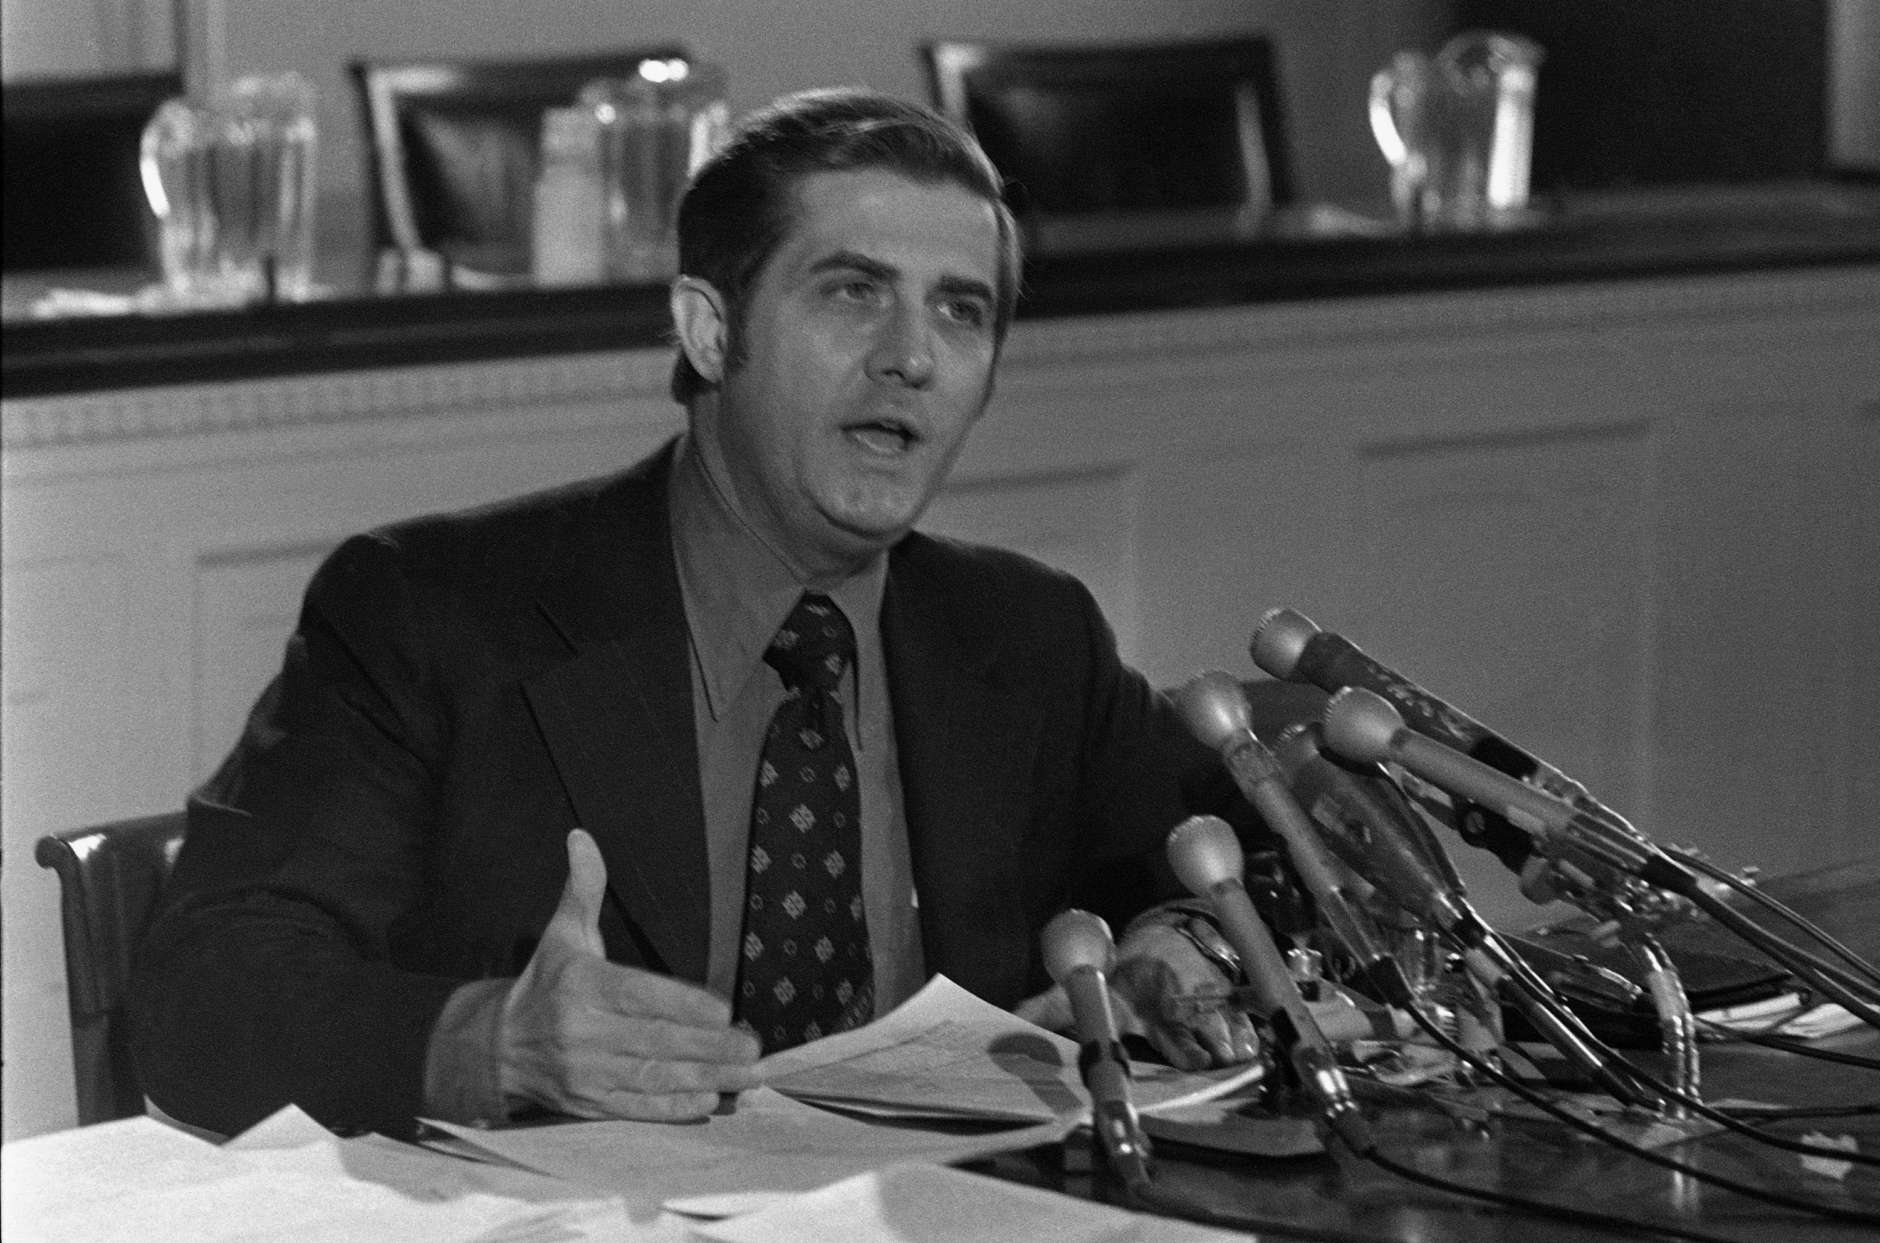 Rep. Lawrence J. Hogan calls for a constitutional amendment to protect abortions in most cases, January 30, 1973. Hogan said enactment of a constitutional amendment would be the only effective way to counteract the Supreme Court's decision last week that states may not forbid women to have abortions during the first six months of pregnancy. (AP Photo)